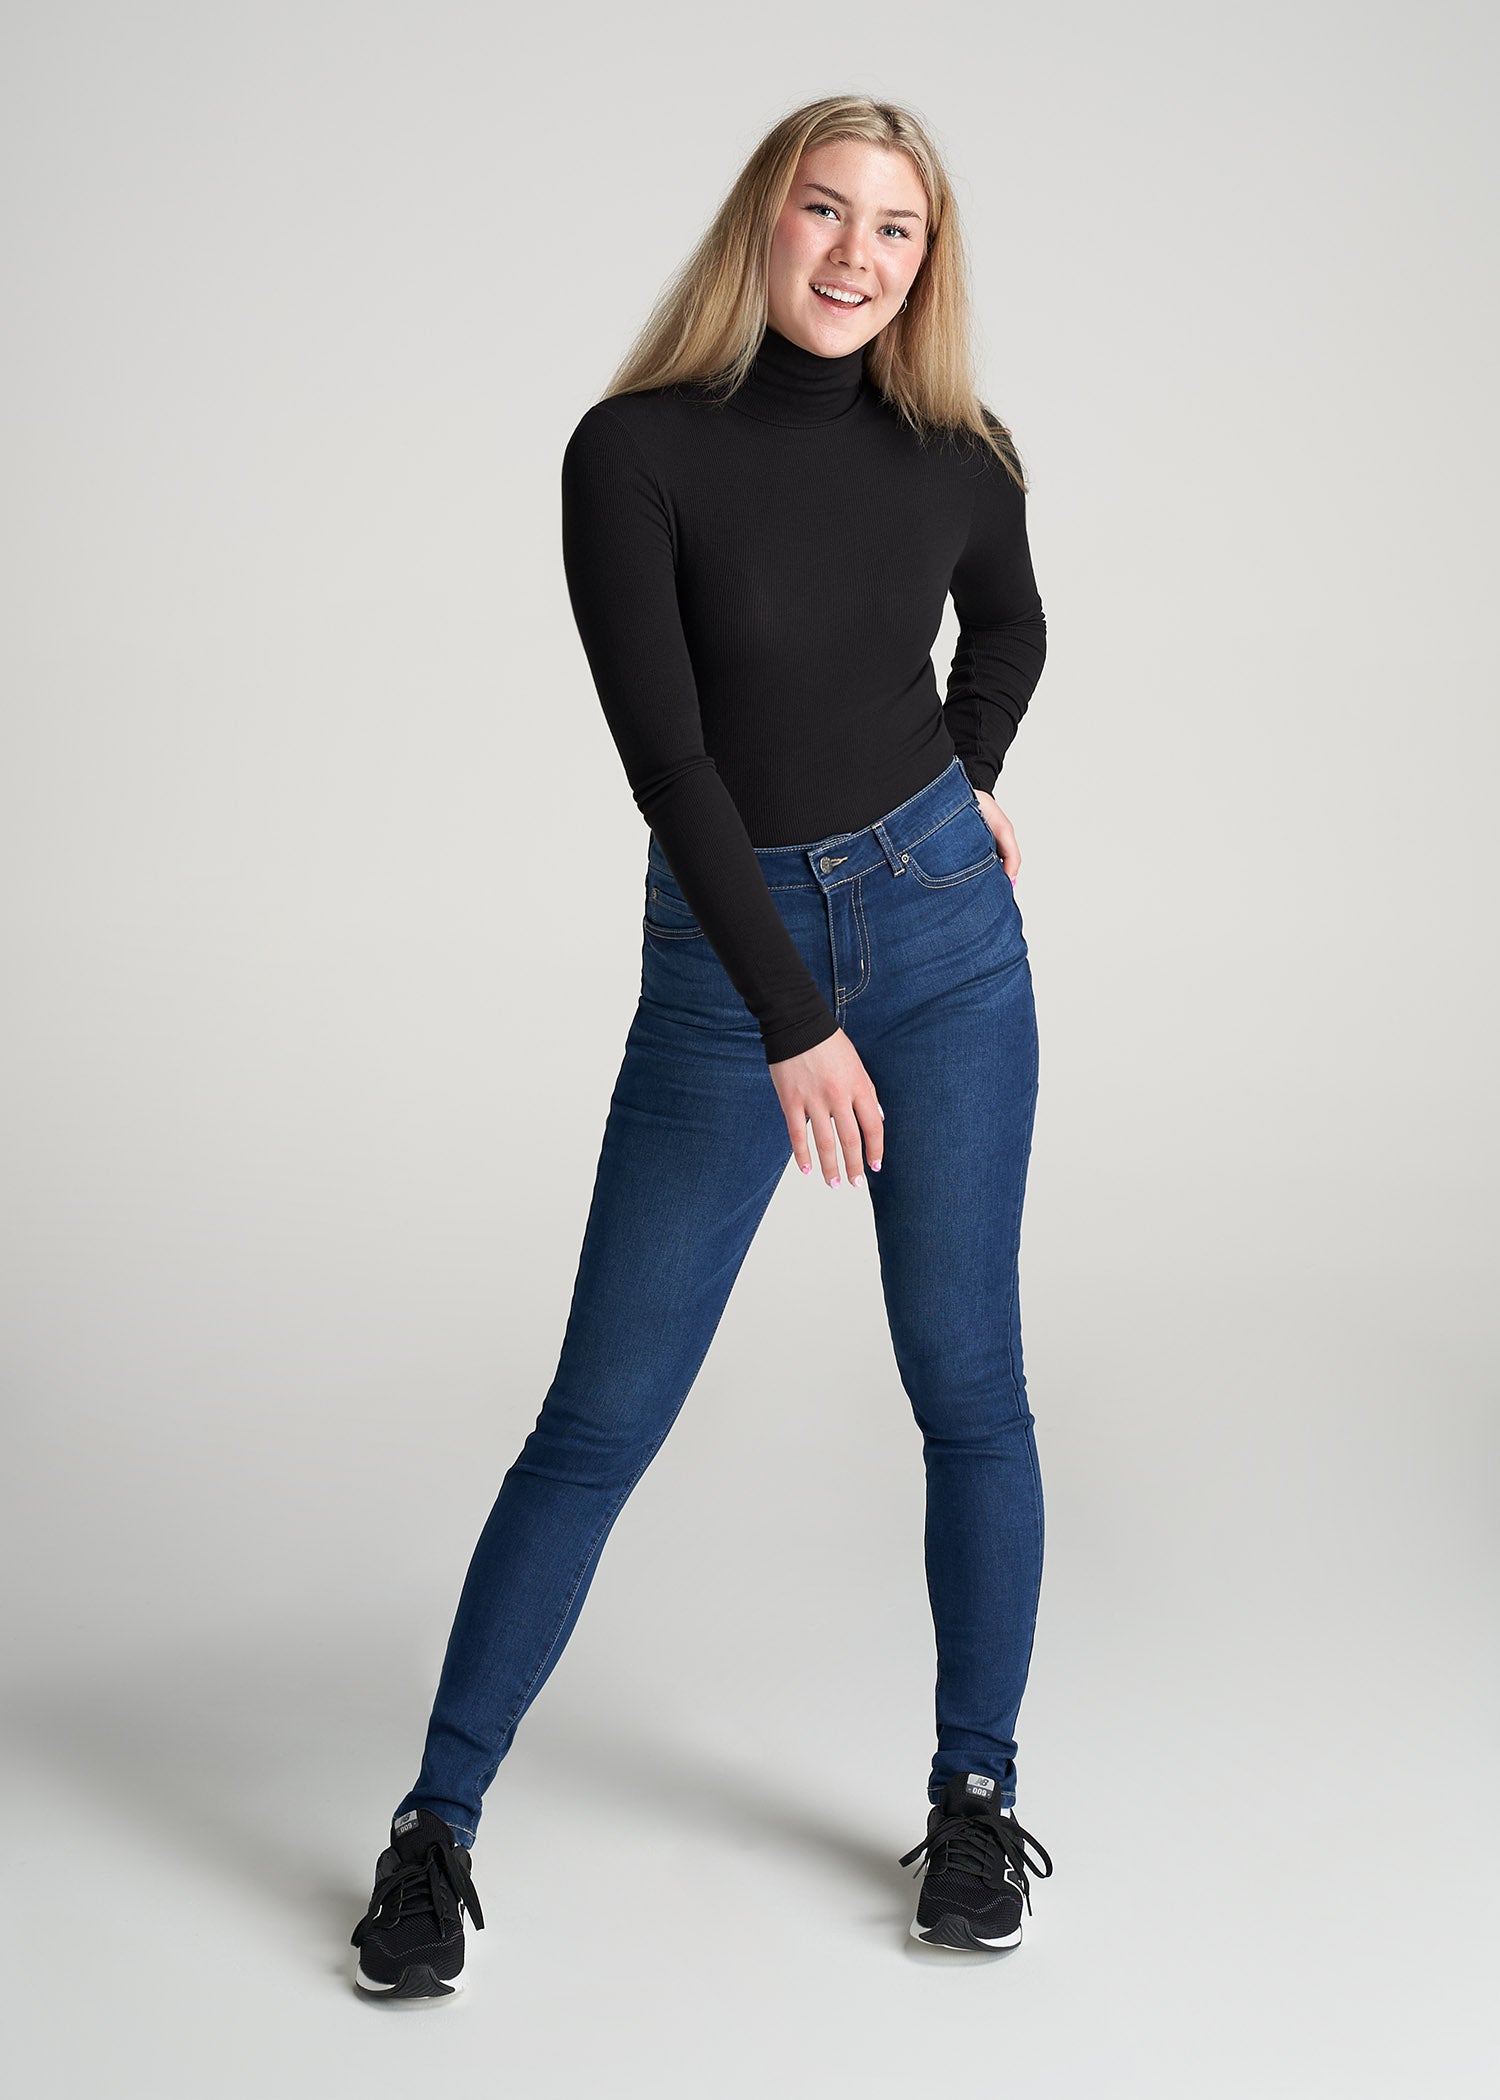 Tall Women's FITTED Long Sleeve Ribbed Turtleneck Tee in Black